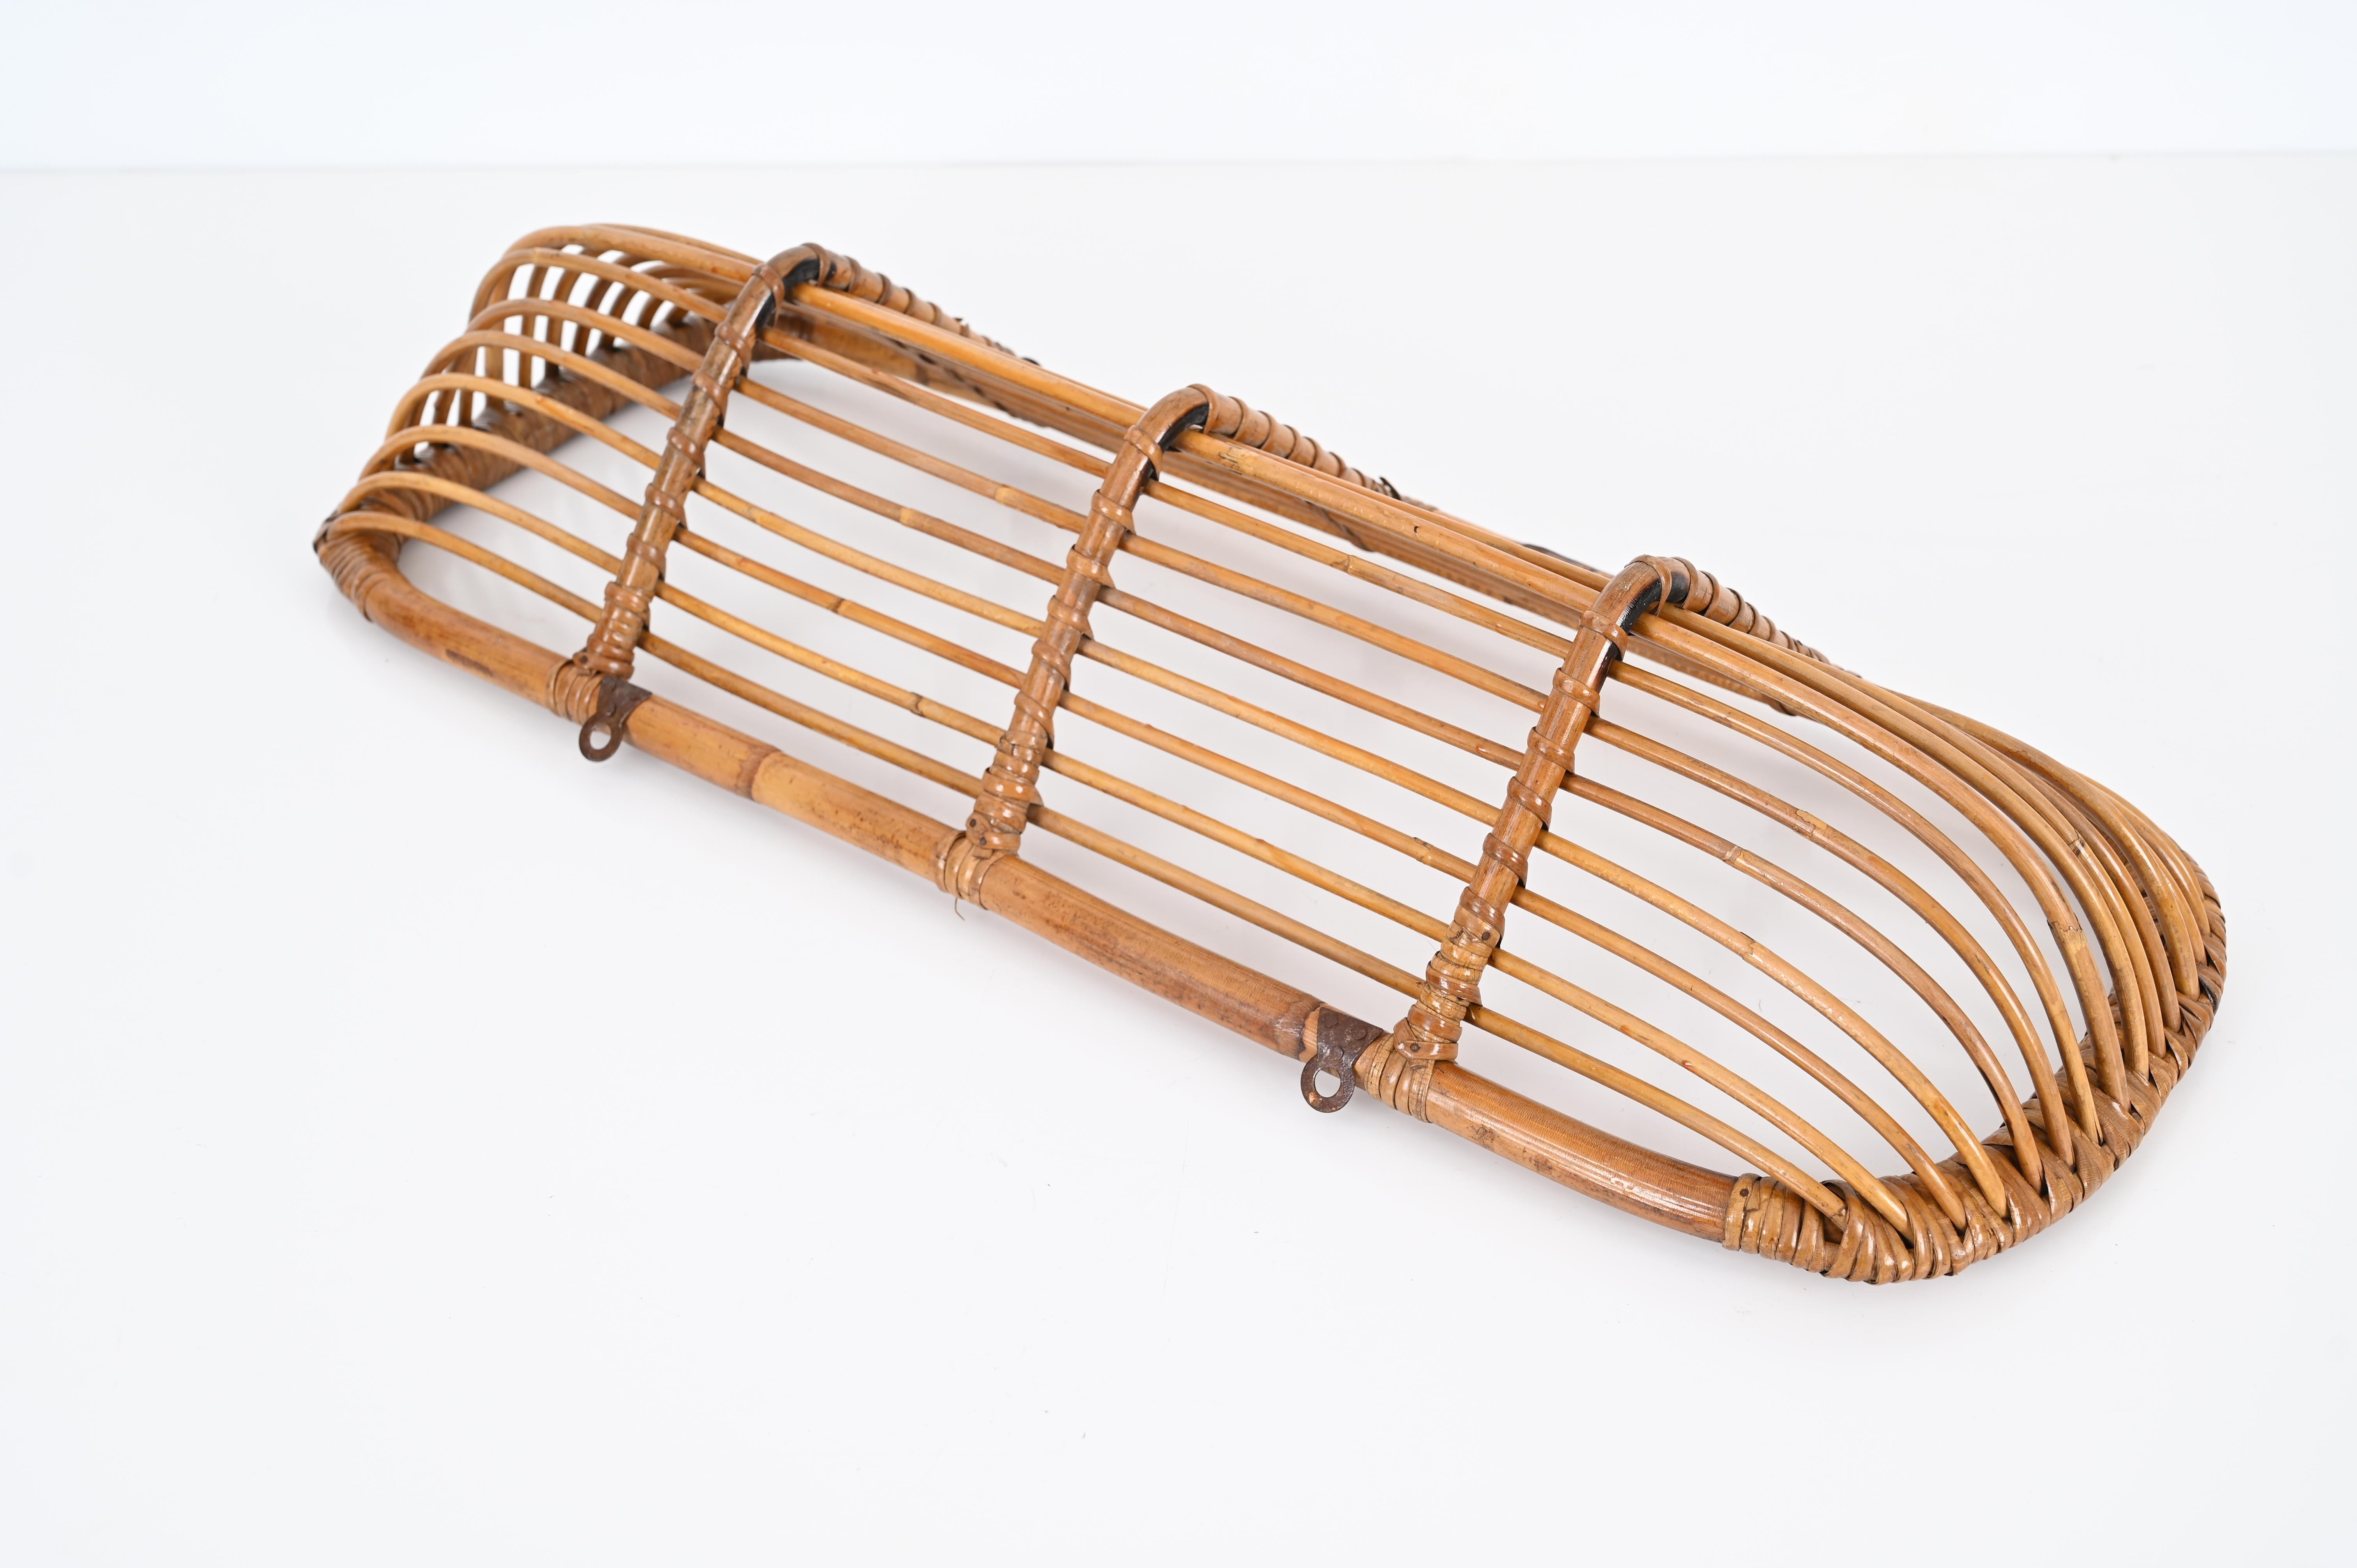  Franco Albini Mid-Century Wall Shelf in Rattan and Bamboo, Italy, 1960s For Sale 8